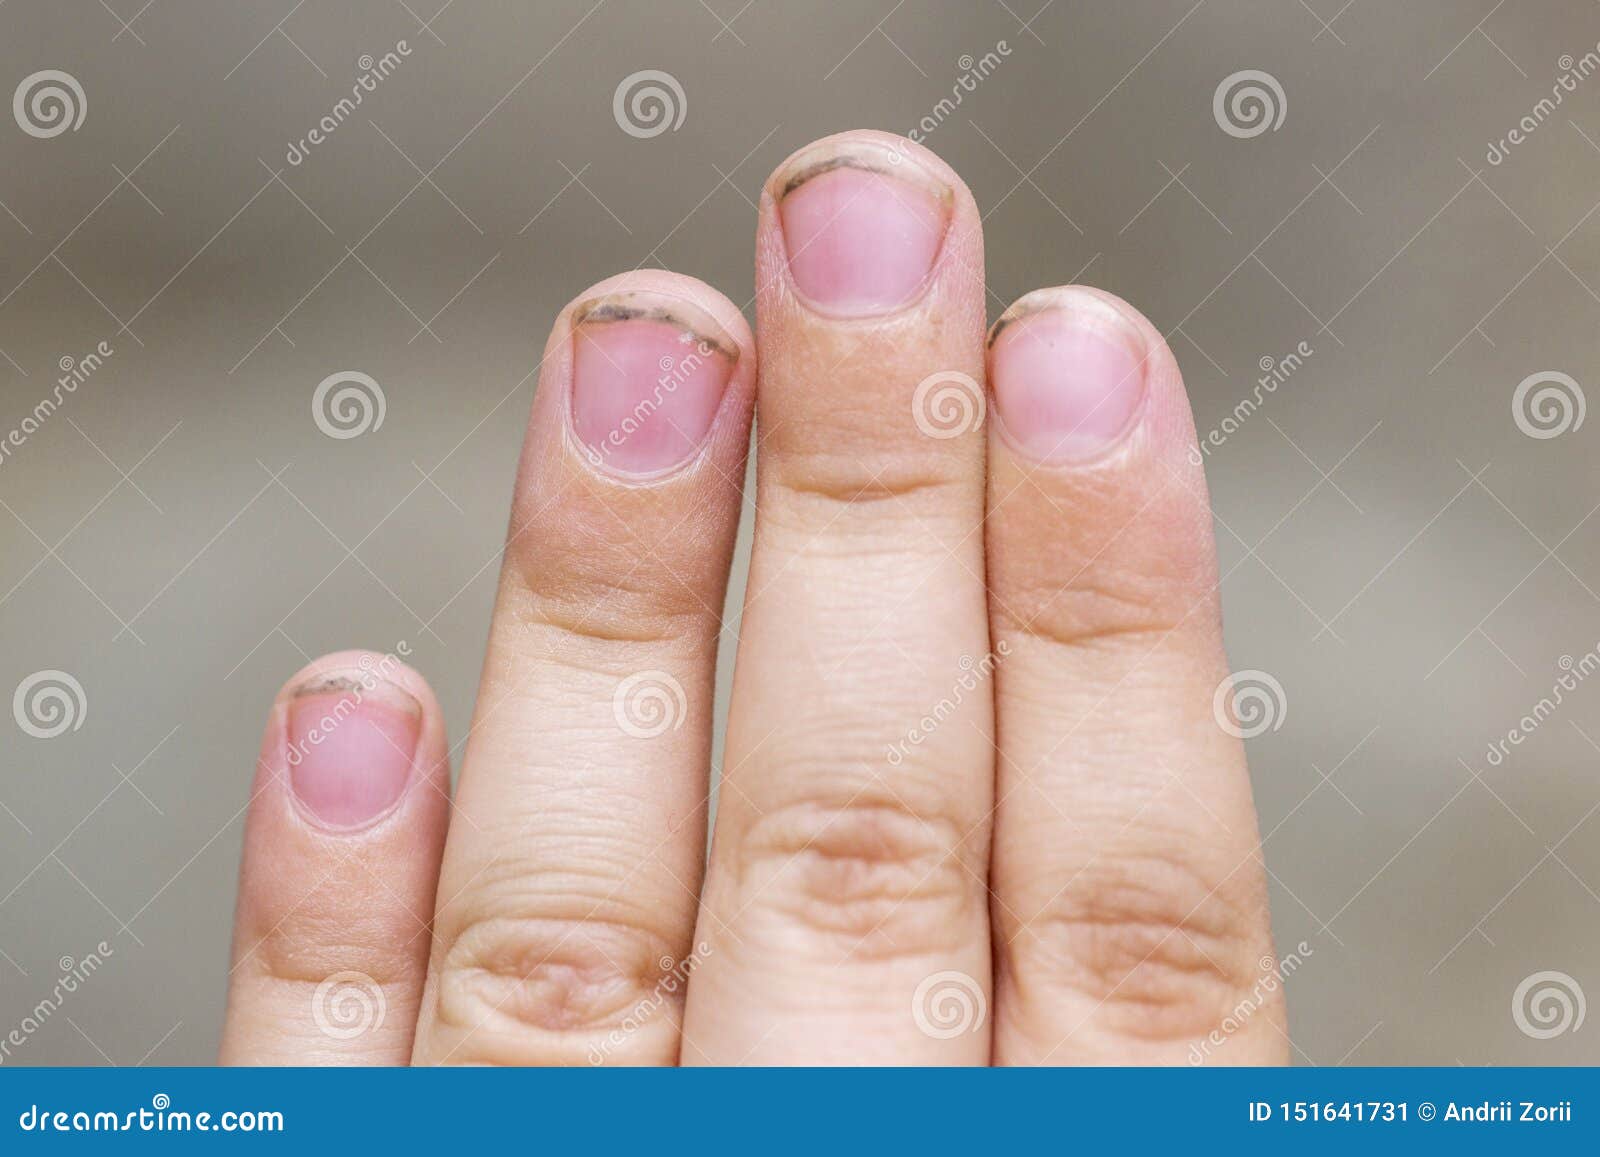 Dirty Long Nails Have Germs Make Sick. Dirt Under the Nails of a Child  Stock Image - Image of cure, fingernail: 151641731